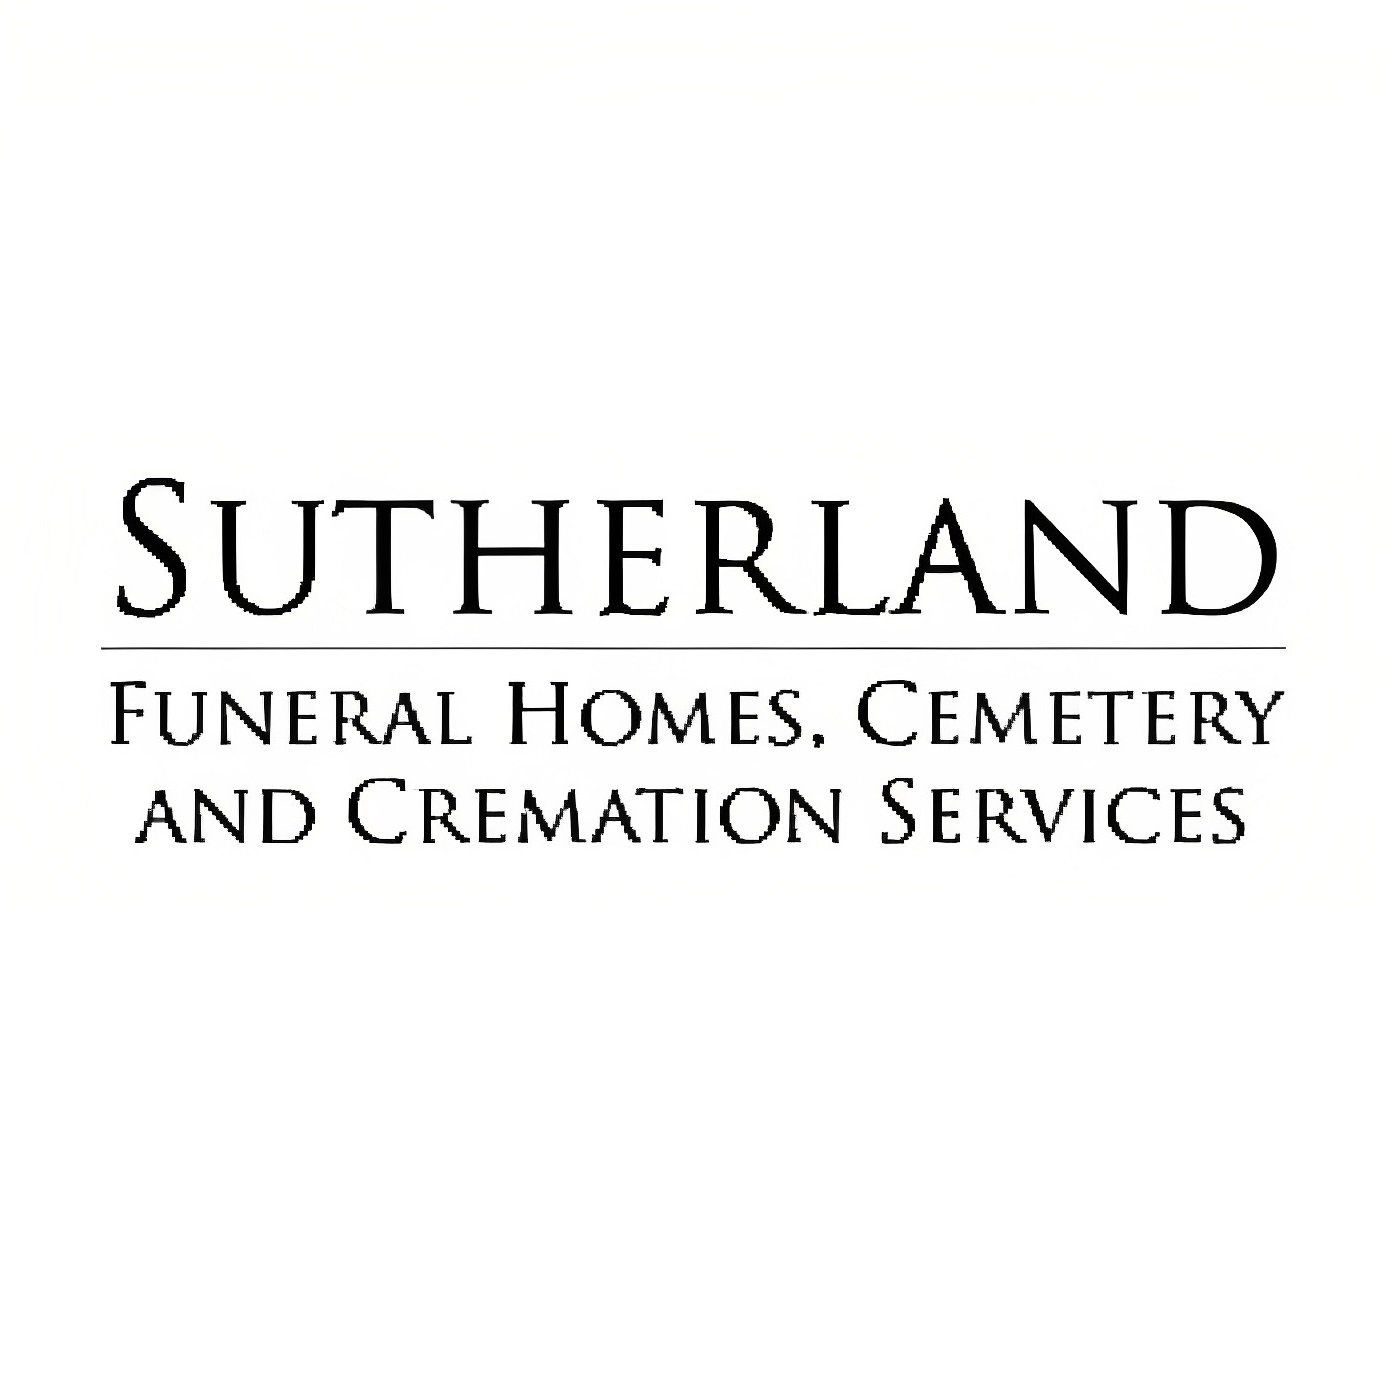 sutherland-garnier funeral home and cremation services | funeral directors in centralia